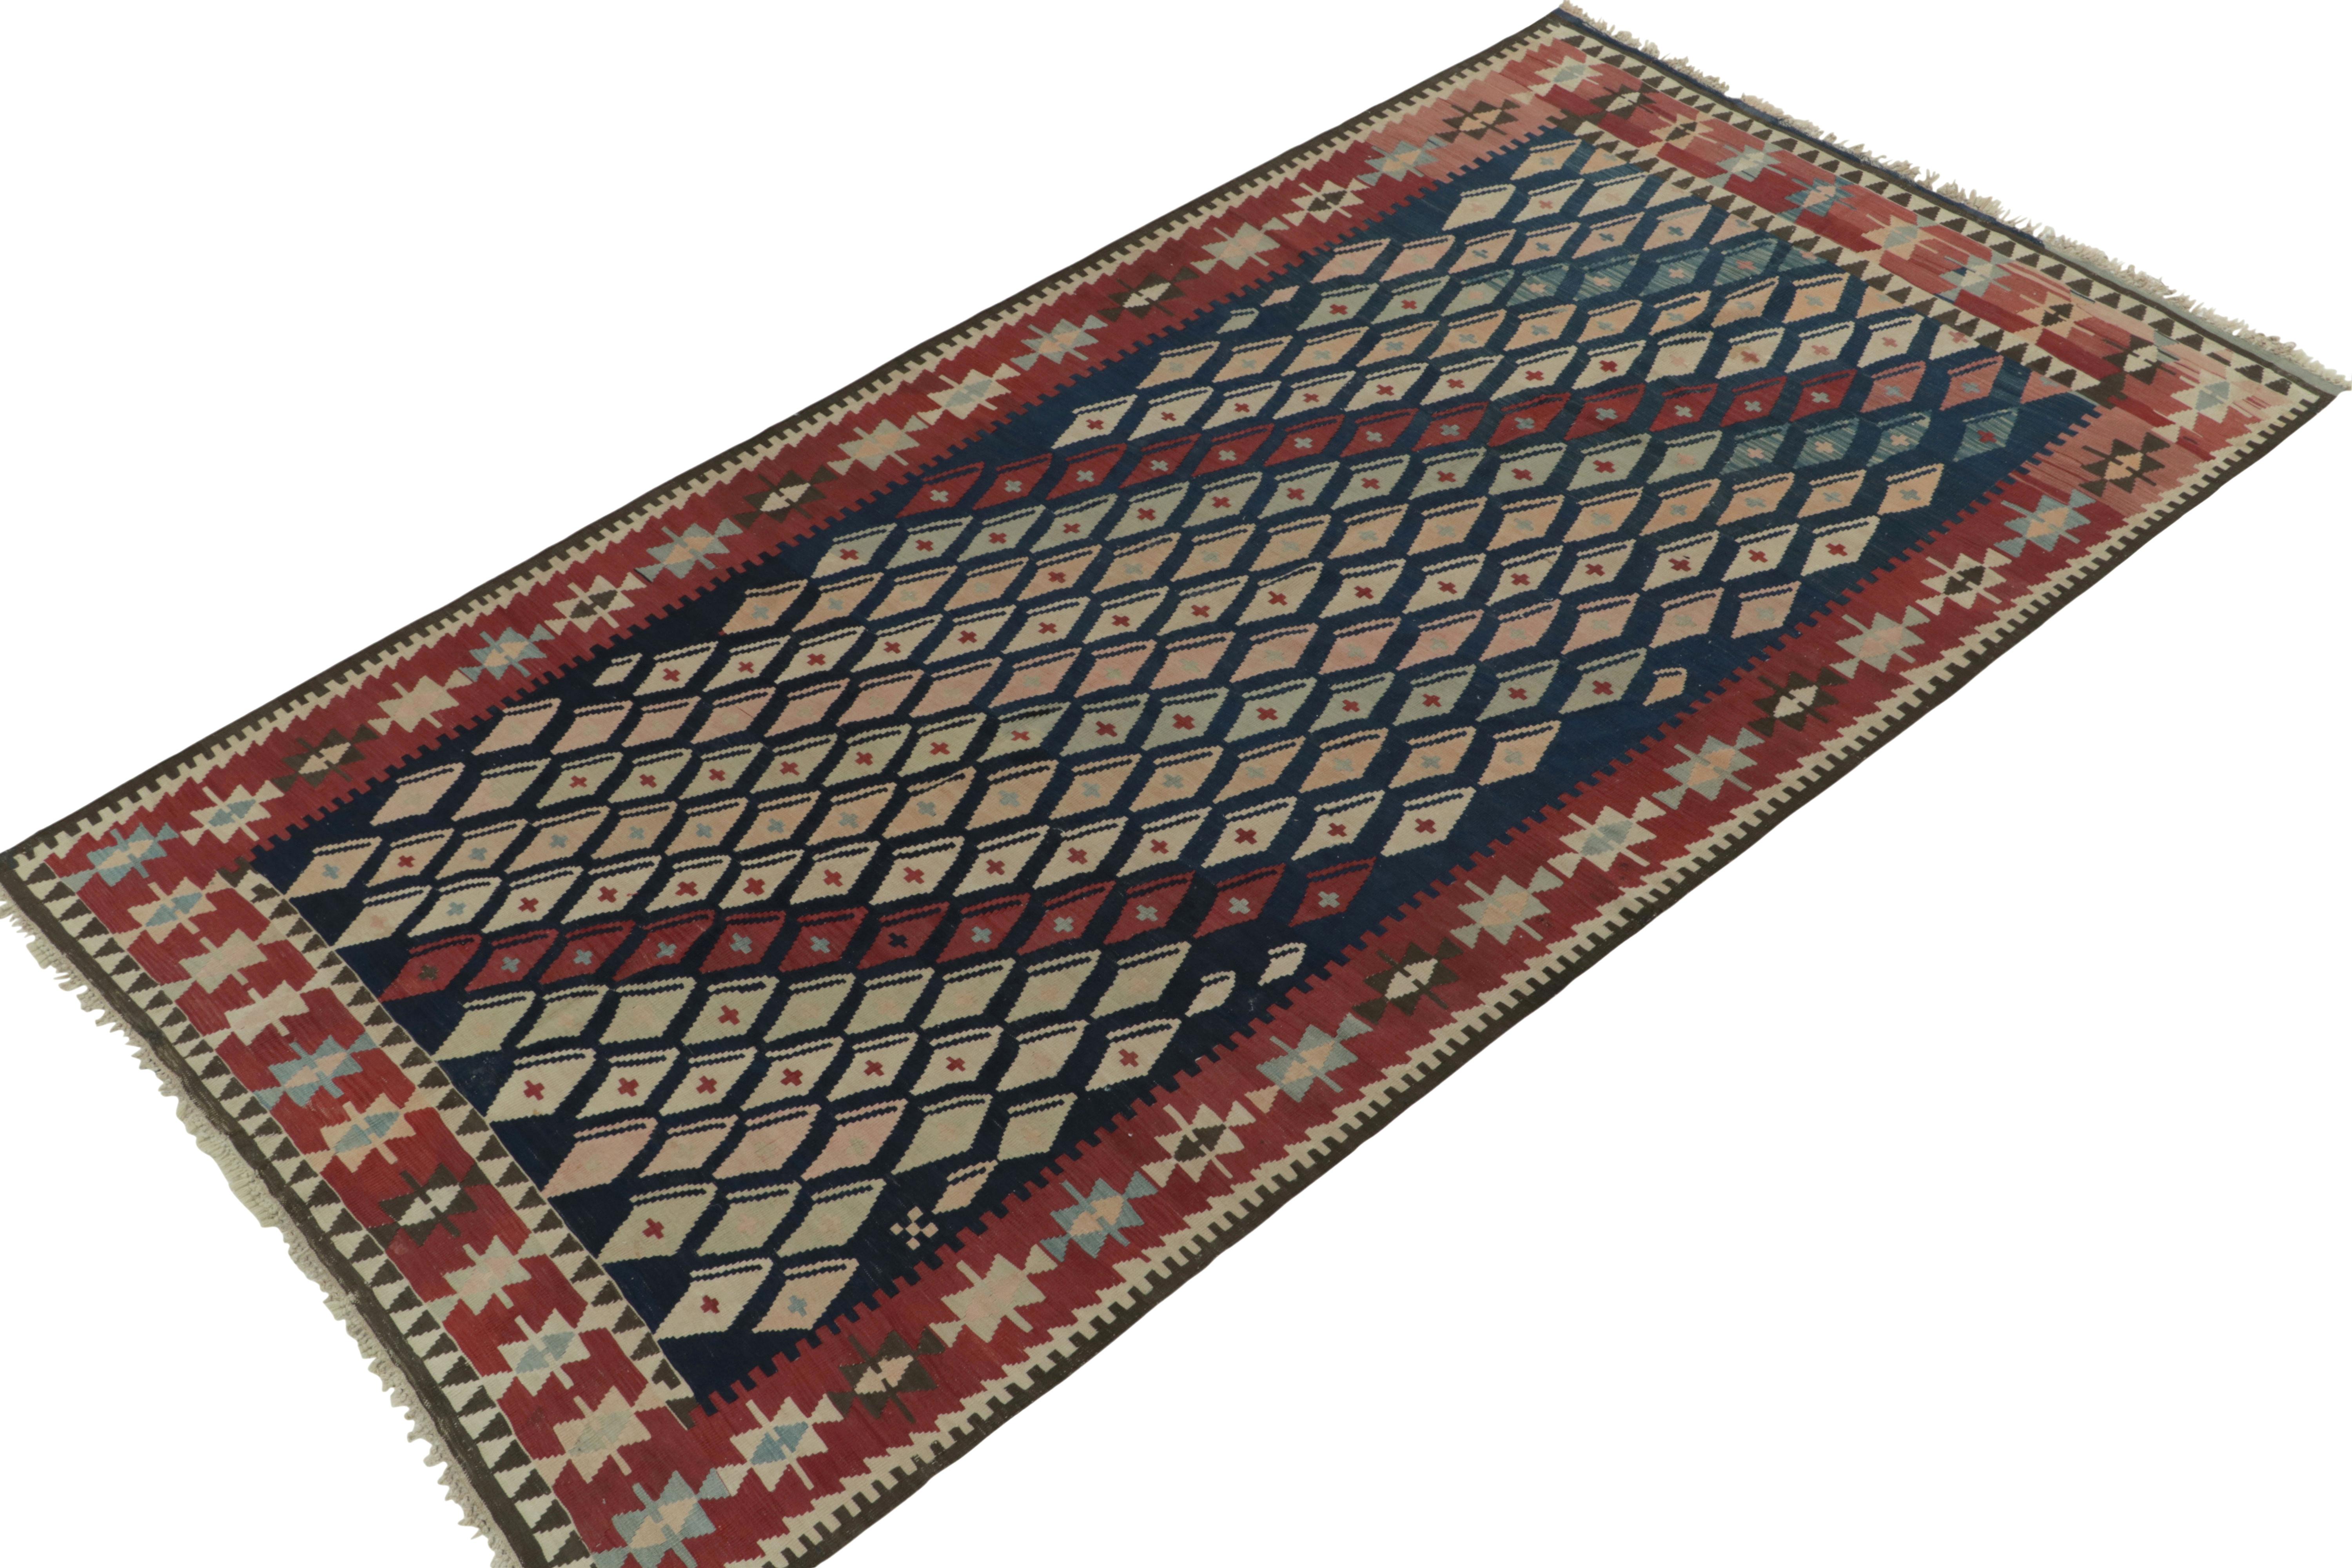 Hand-knotted in wool, a 5x10 vintage kilim rug entering Rug & Kilim’s coveted flat weave collection. This dedicated piece enjoys a dextrous tribal geometric pattern with a uniquely playful colorway of luscious red, blue, pink & beige —all